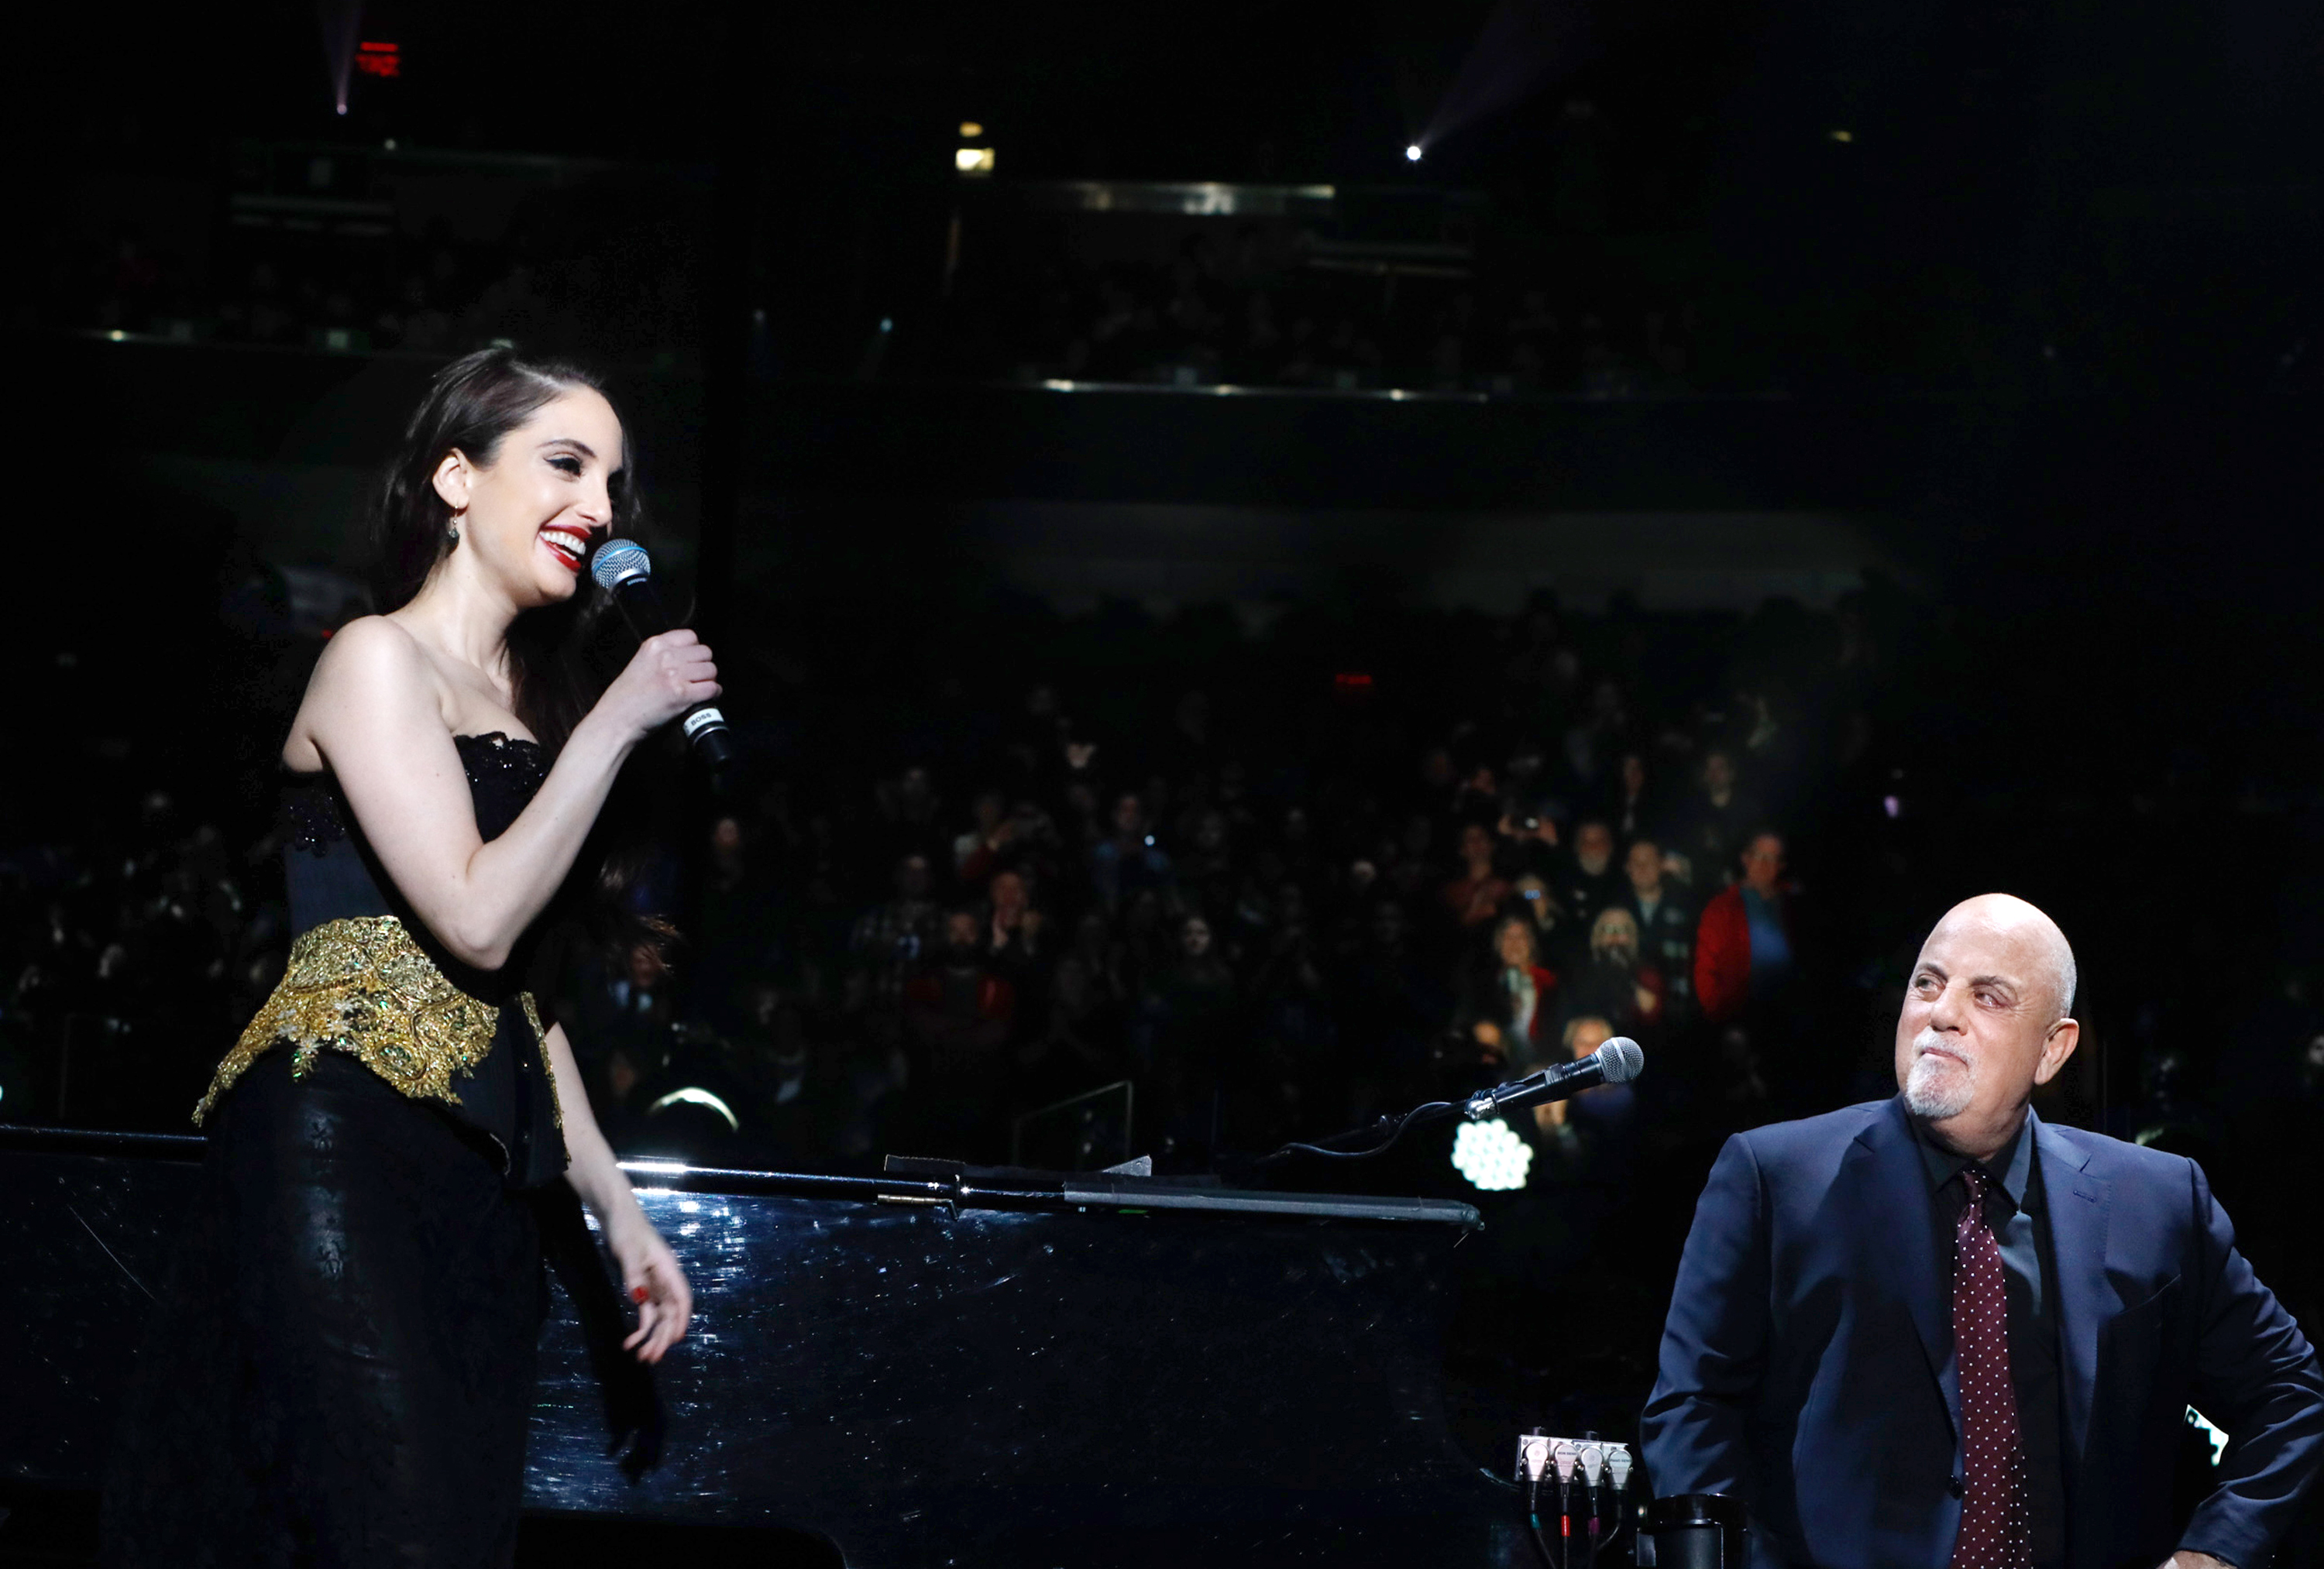 Alexa Ray Joel joins her father Billy Joel onstage at Madison Square Garden on December 19, 2018, in New York City. | Source: Getty Images